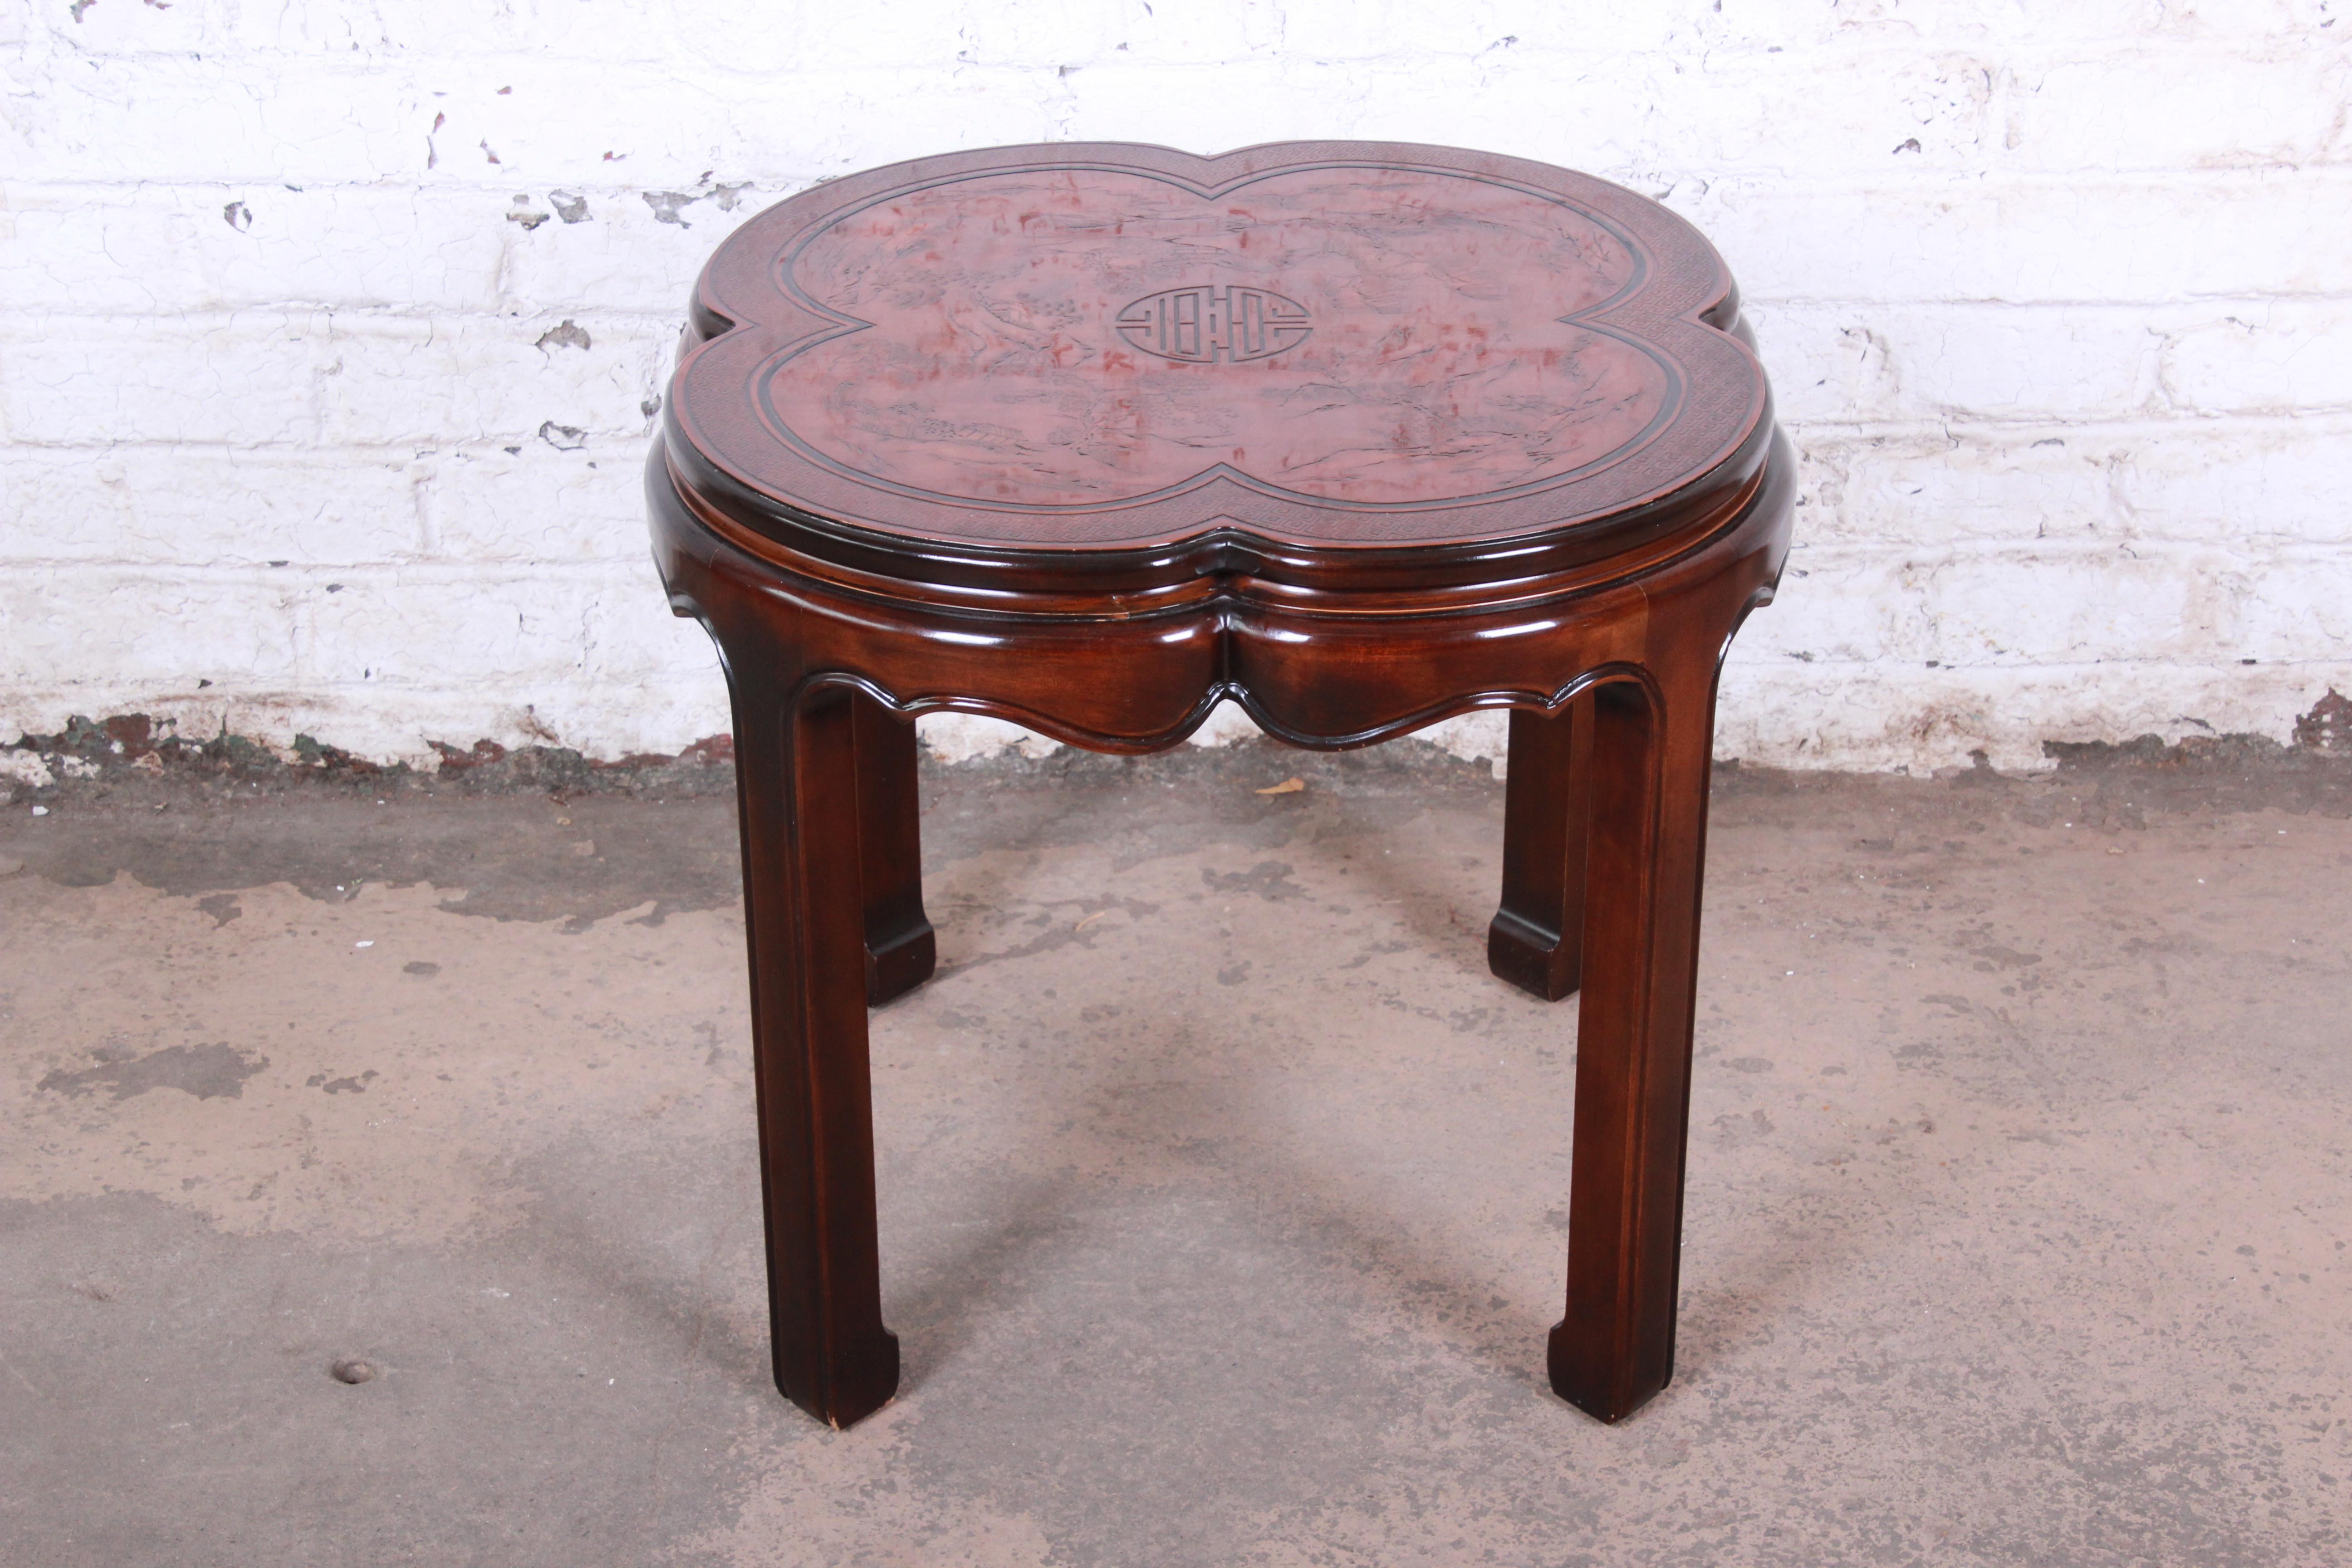 A gorgeous Hollywood Regency chinoiserie occasional table from the connoisseur line by Drexel Heritage. The table features beautiful mahogany wood grain, a unique clover shape, and nice carved Asian details with nature scenes. The table is in very